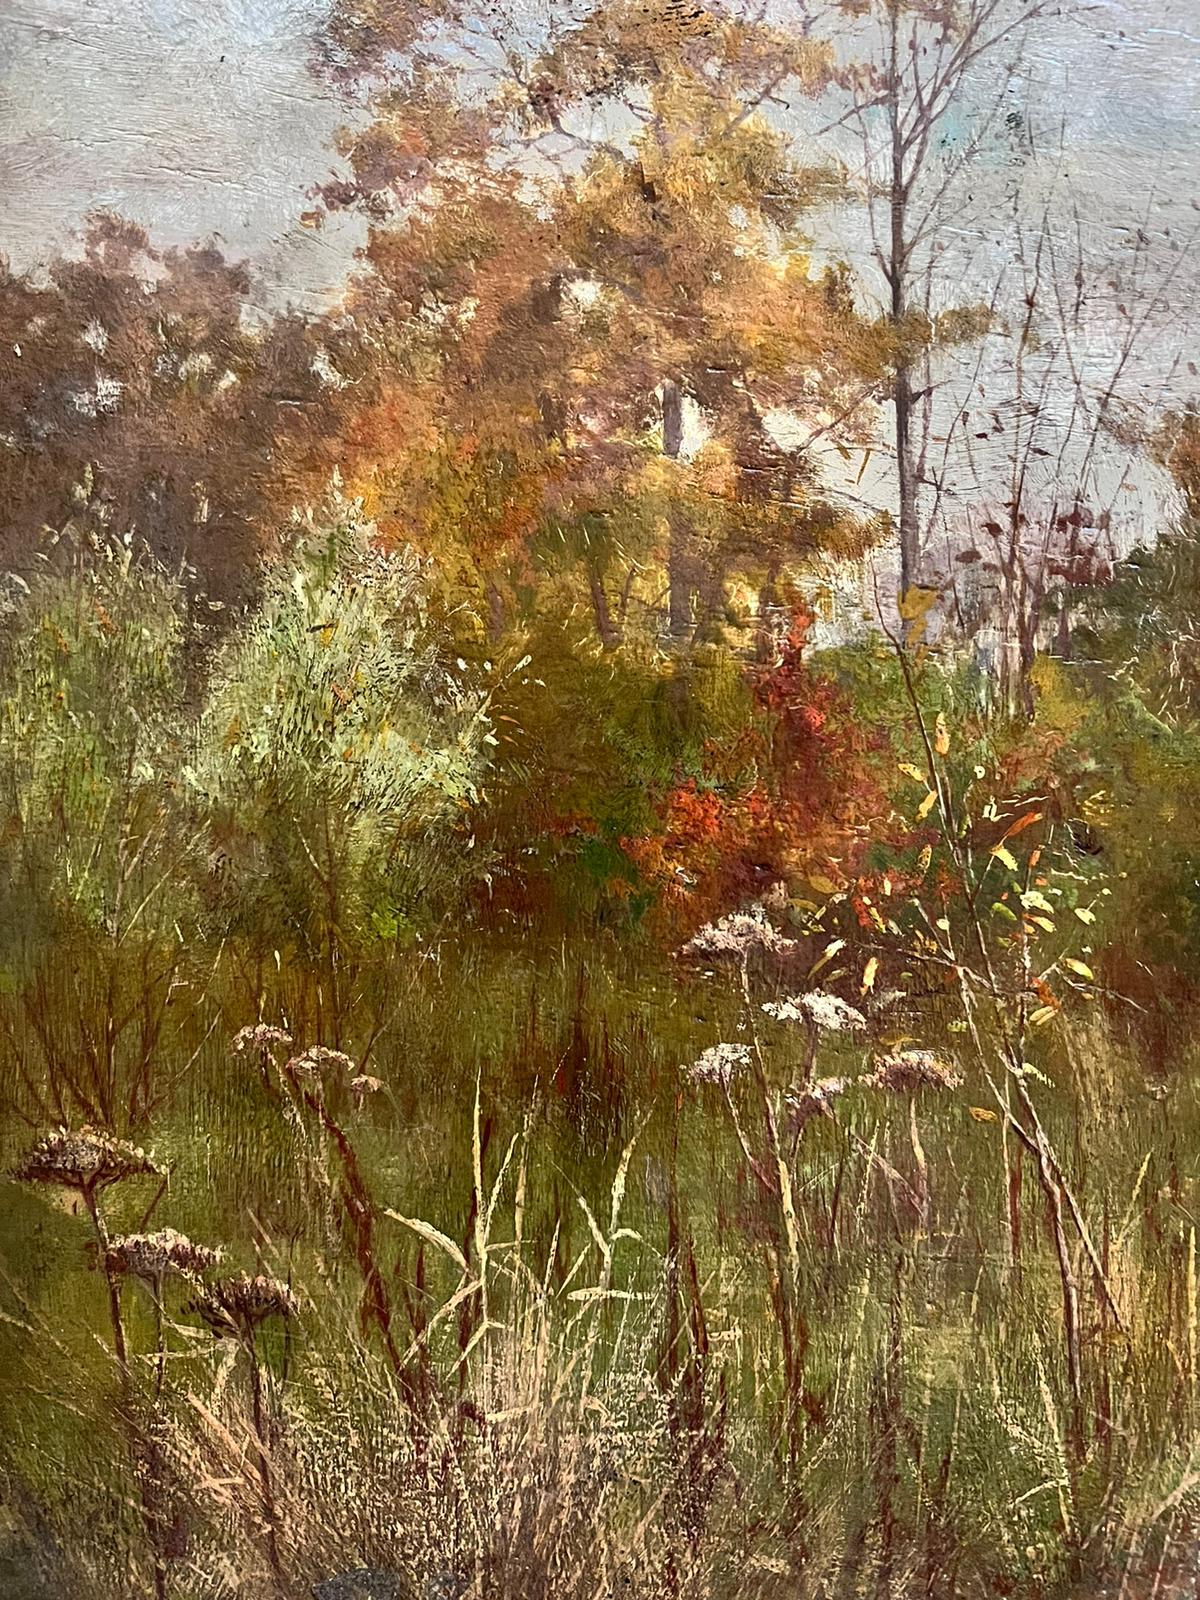 Artist/ School: English School, late 19th/ early 20th century.
The painting came from a large collection of works by one artist. A very few of them are signed what looks to be 'F. Wardle'. Signed intials 'F.W'

Title: Woodland Landscape

Medium: oil